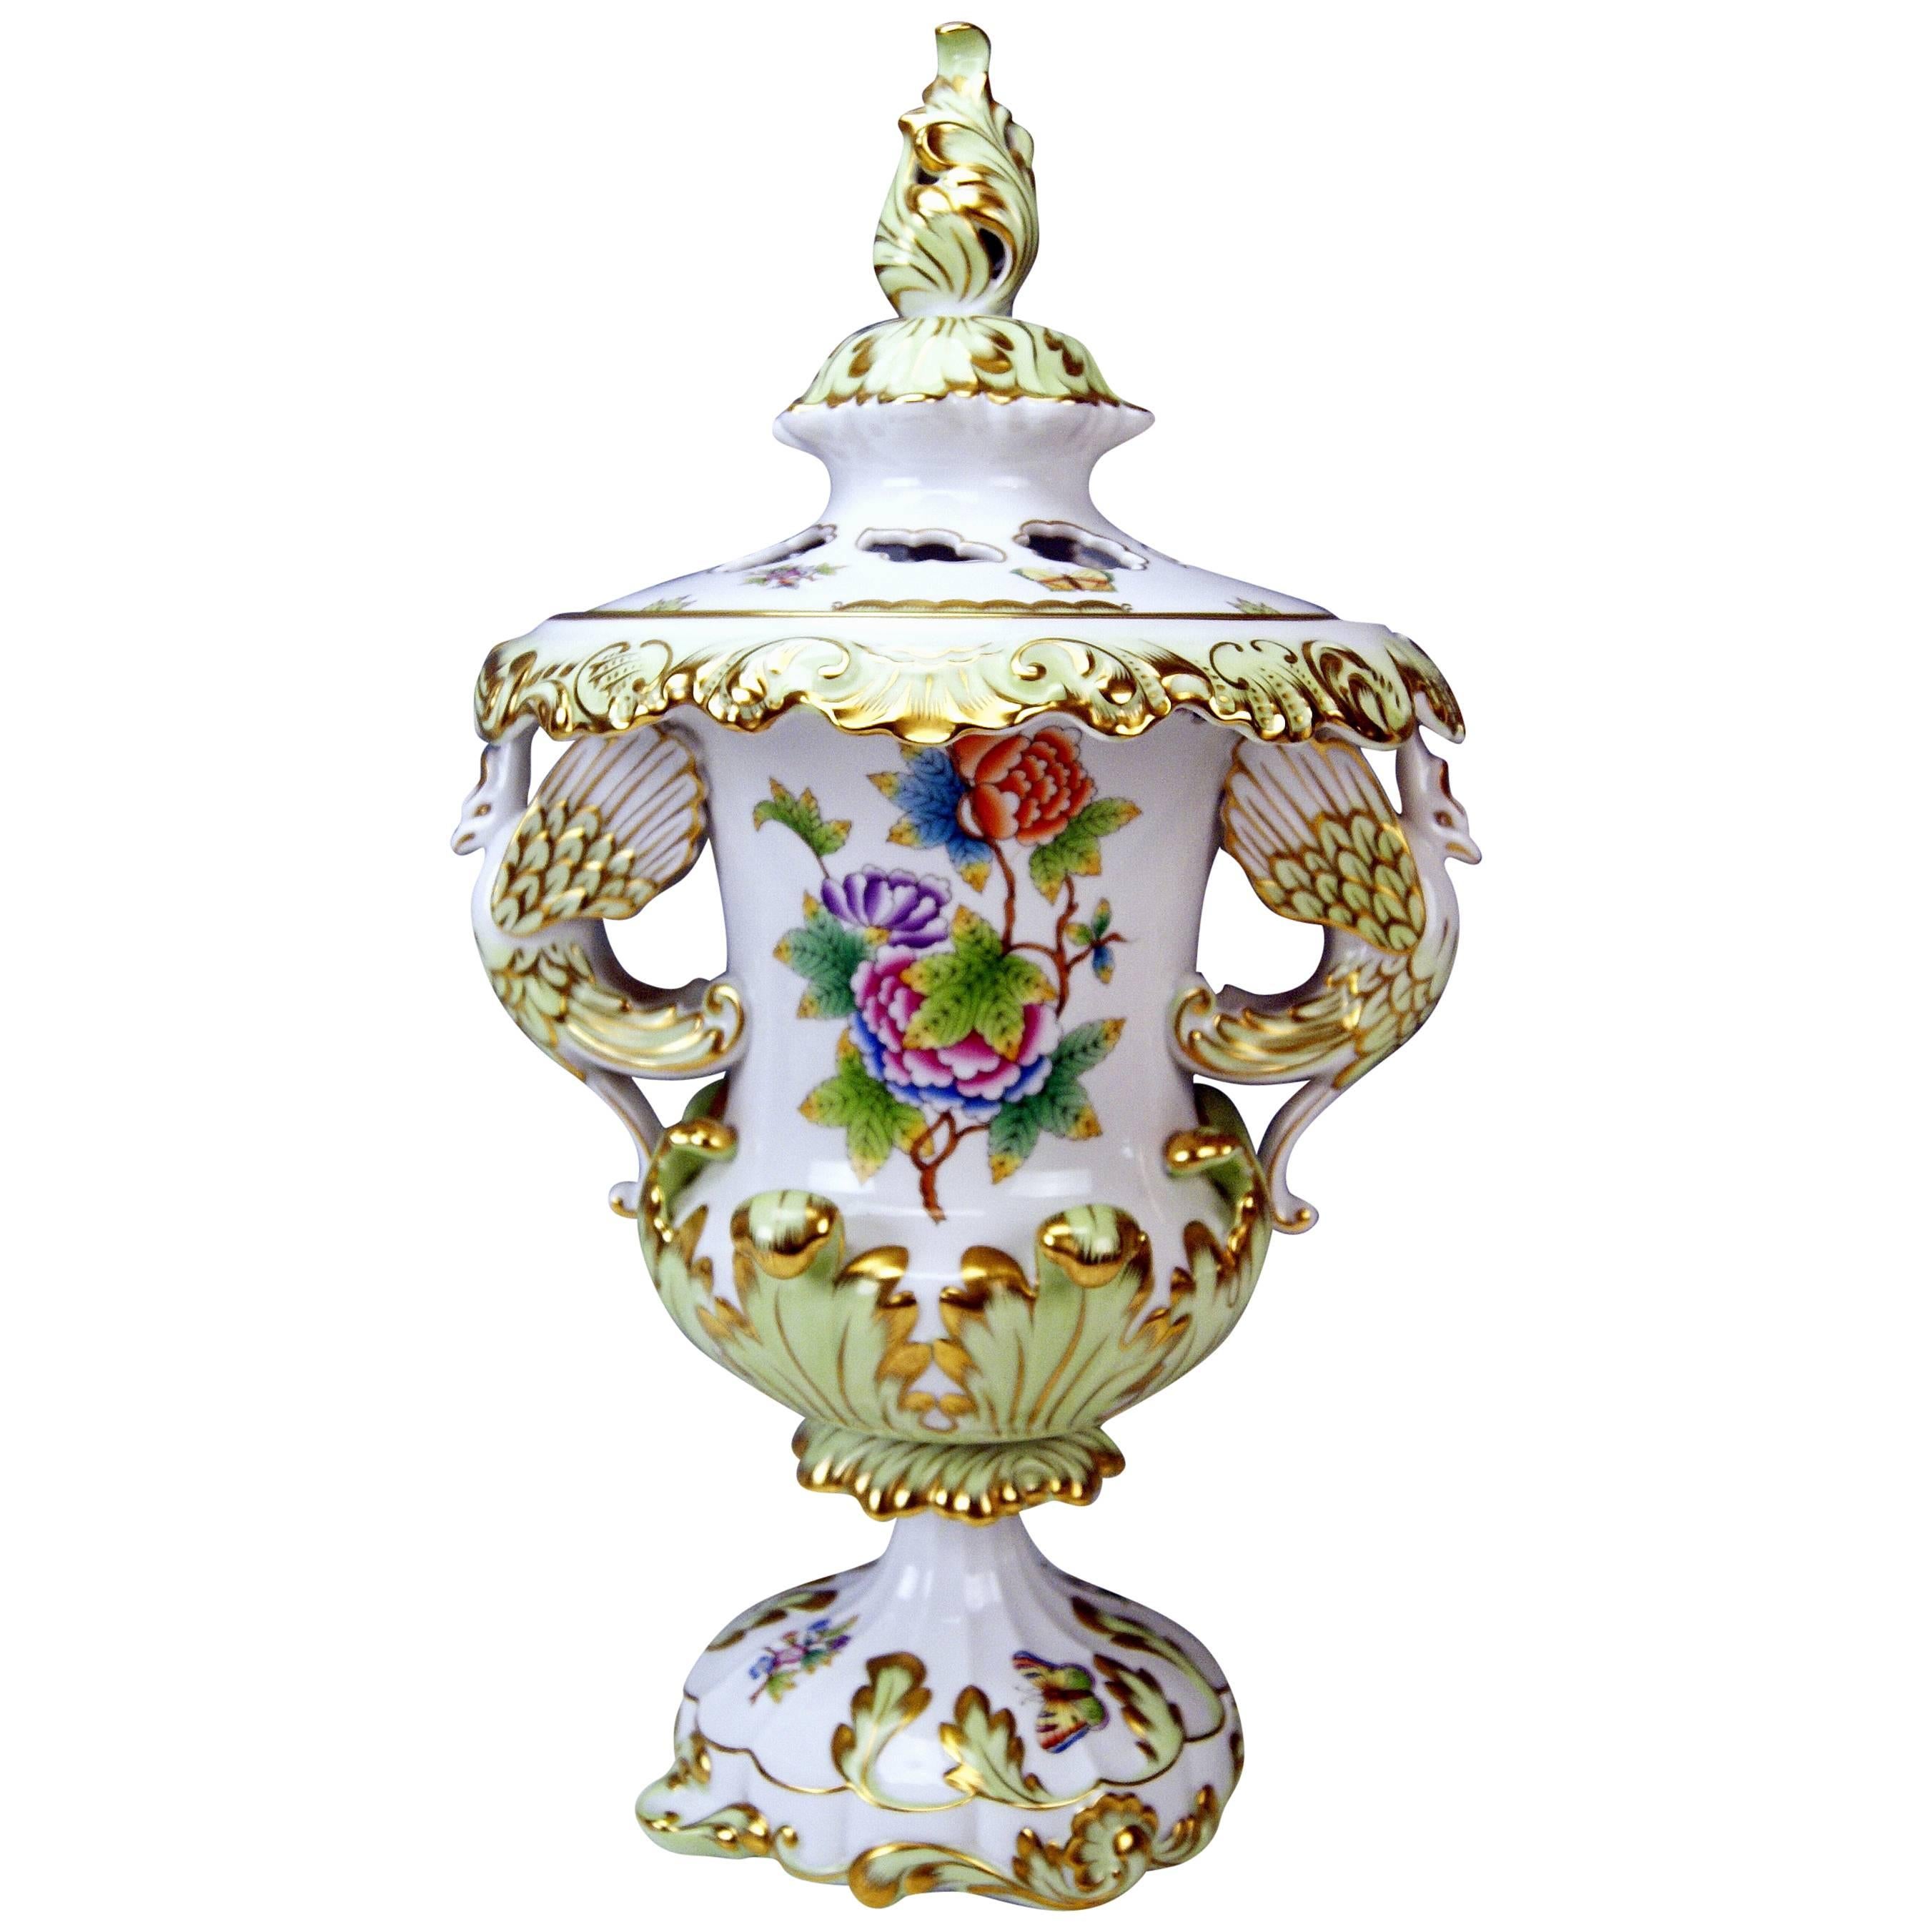 Herend Huge Lidded Vase VBO Hungary, circa 1950,  Height: 22.63 inches